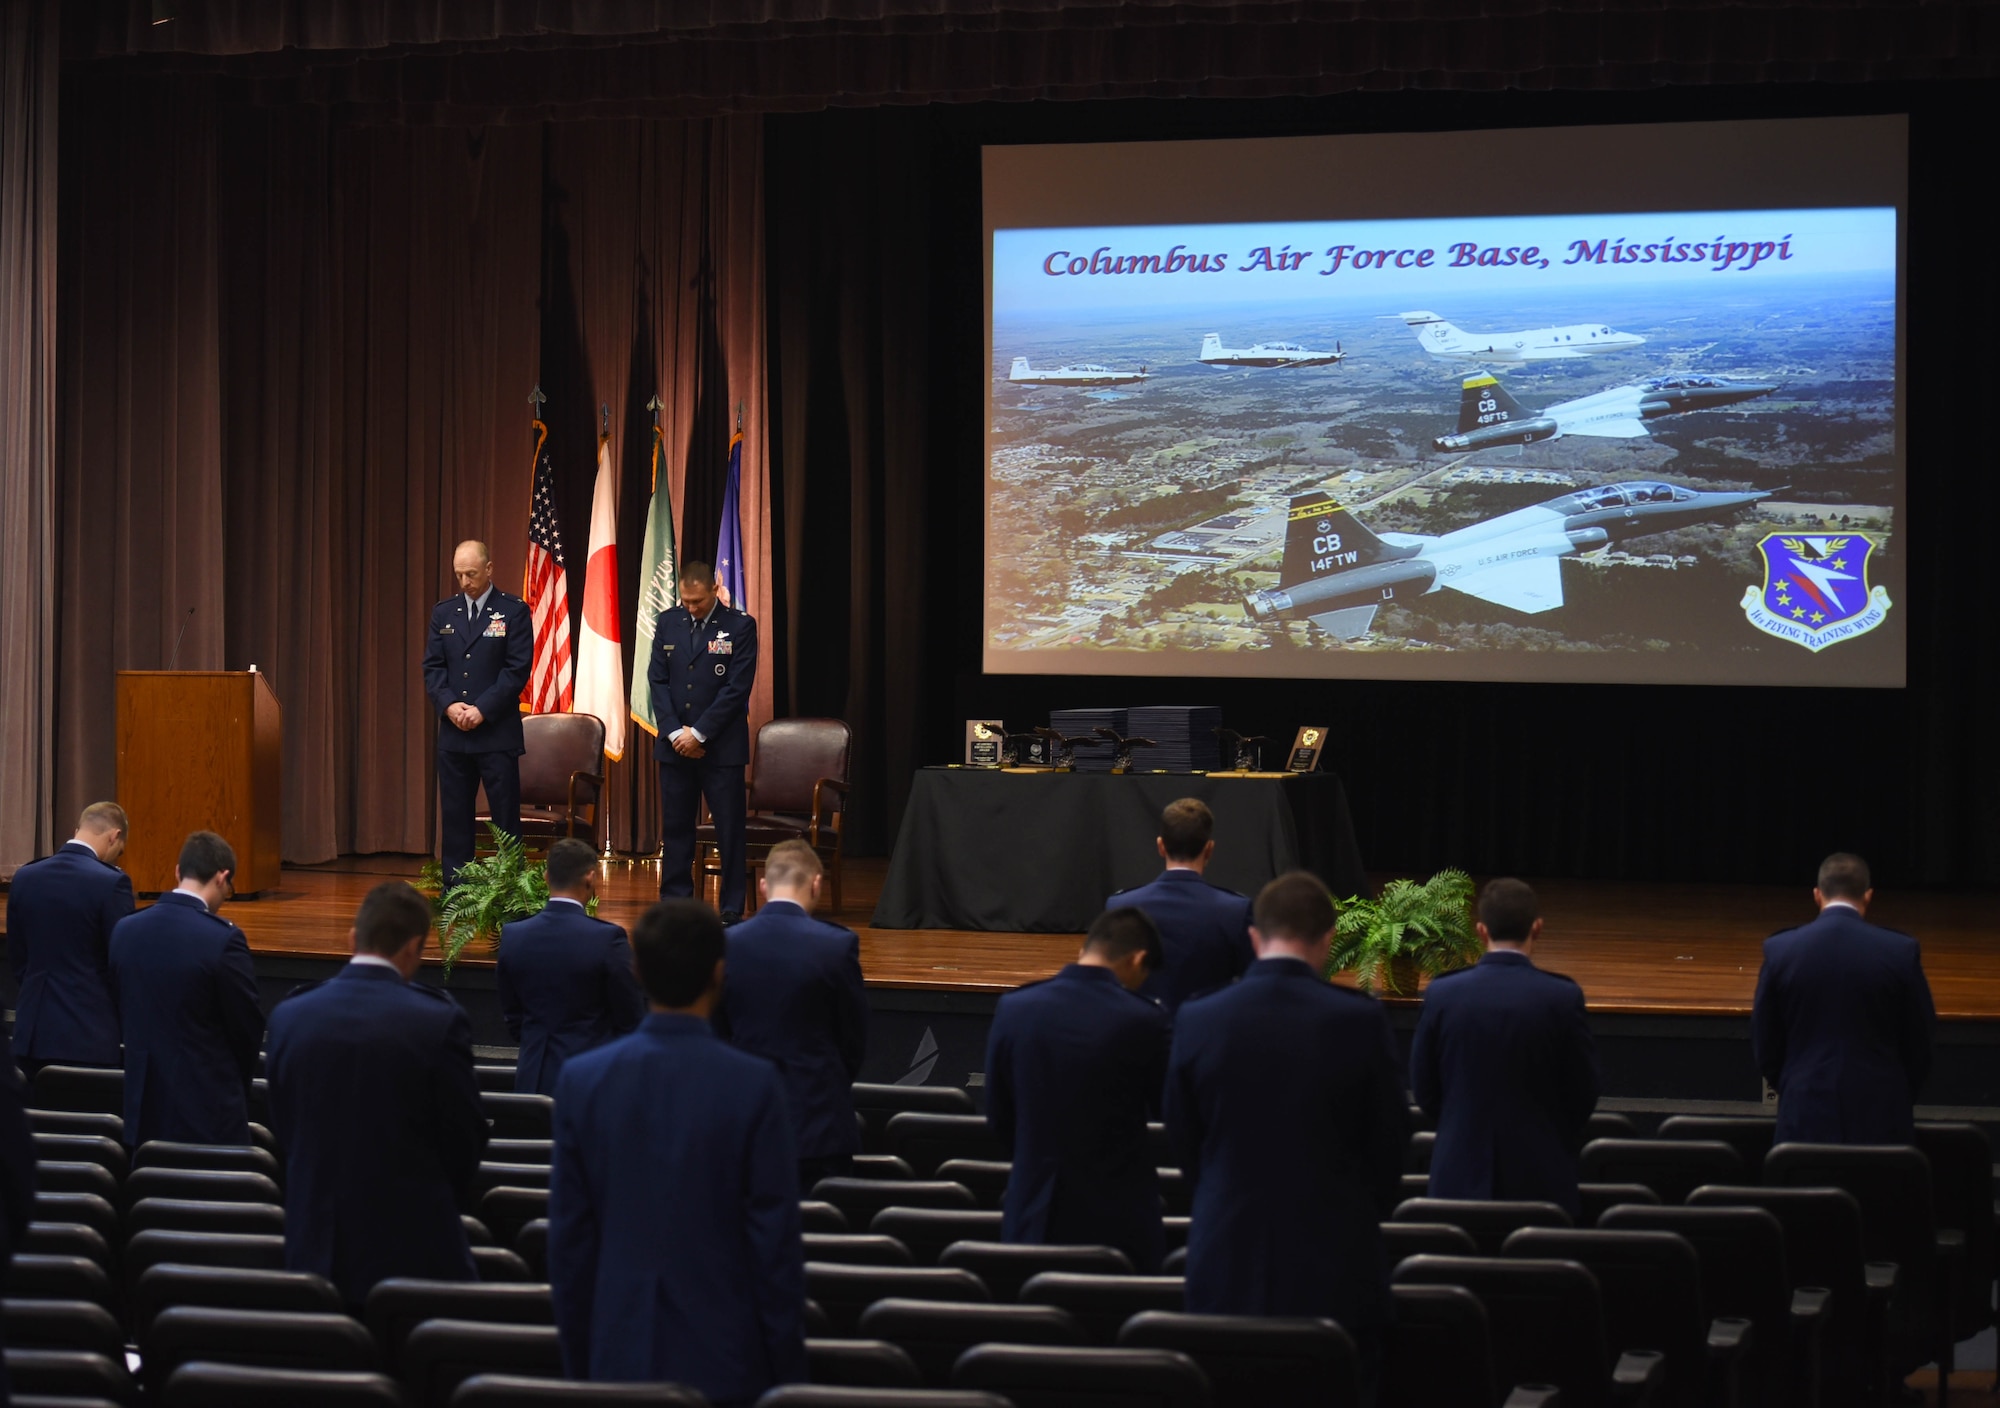 Specialized Undergraduate Pilot Training graduates bow their heads in prayer at a graduation ceremony on August 7, 2020, at Columbus Air Force Base, Miss. Students in the graduating classes maintained their six feet distance in light of the COVID-19 pandemic.  (U.S. Air Force photo by Senior Airman Jake Jacobsen)